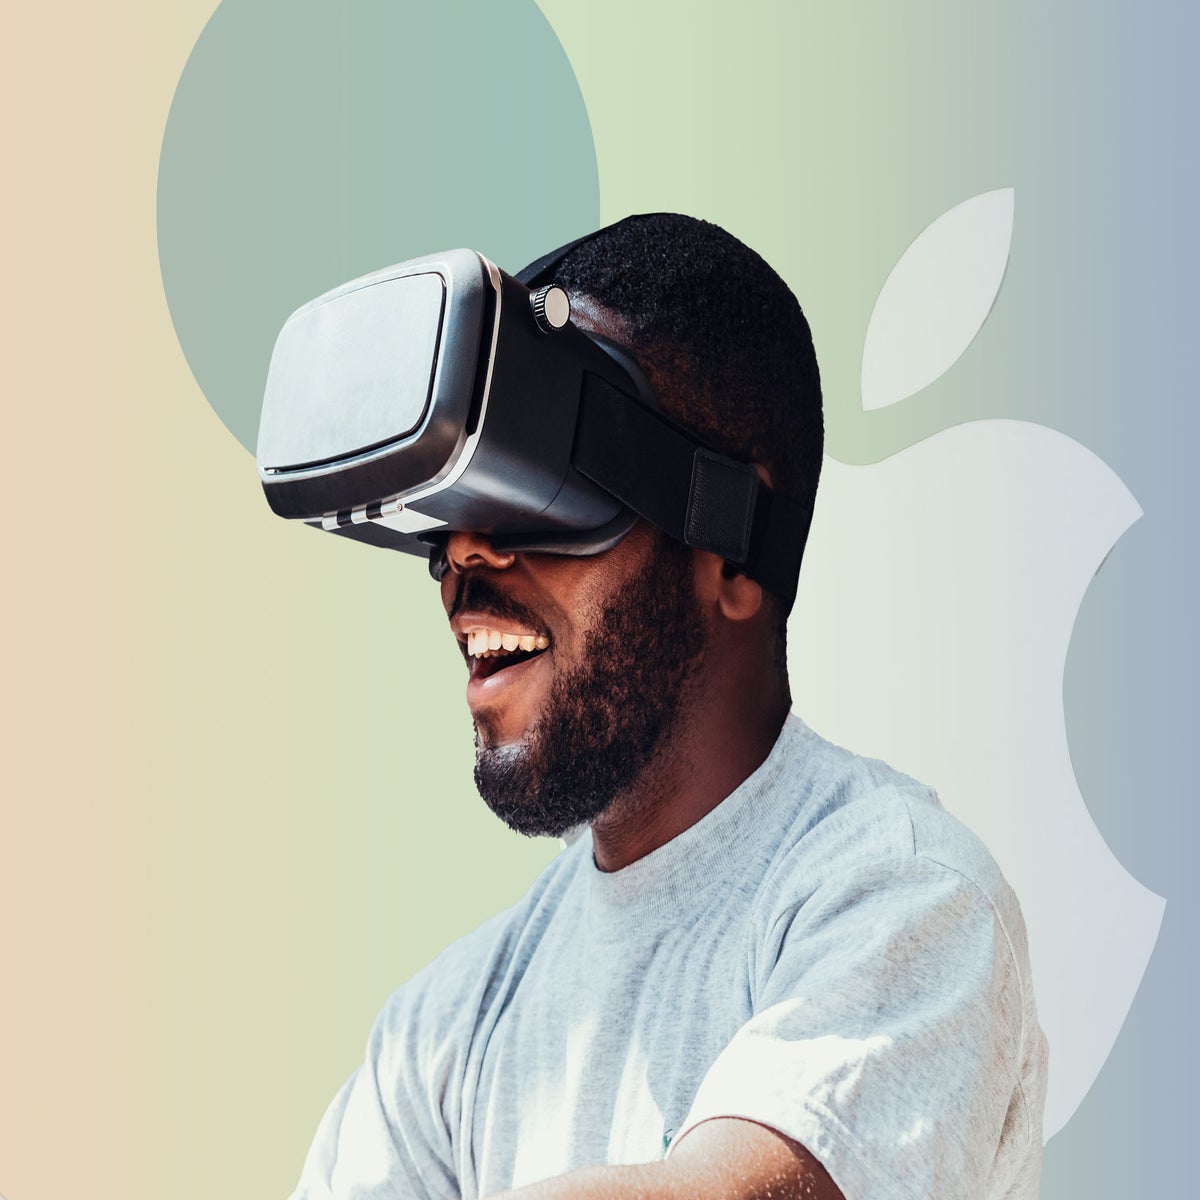 Apple Vision Pro Mixed-Reality Headset: Specs, Price, Release Date